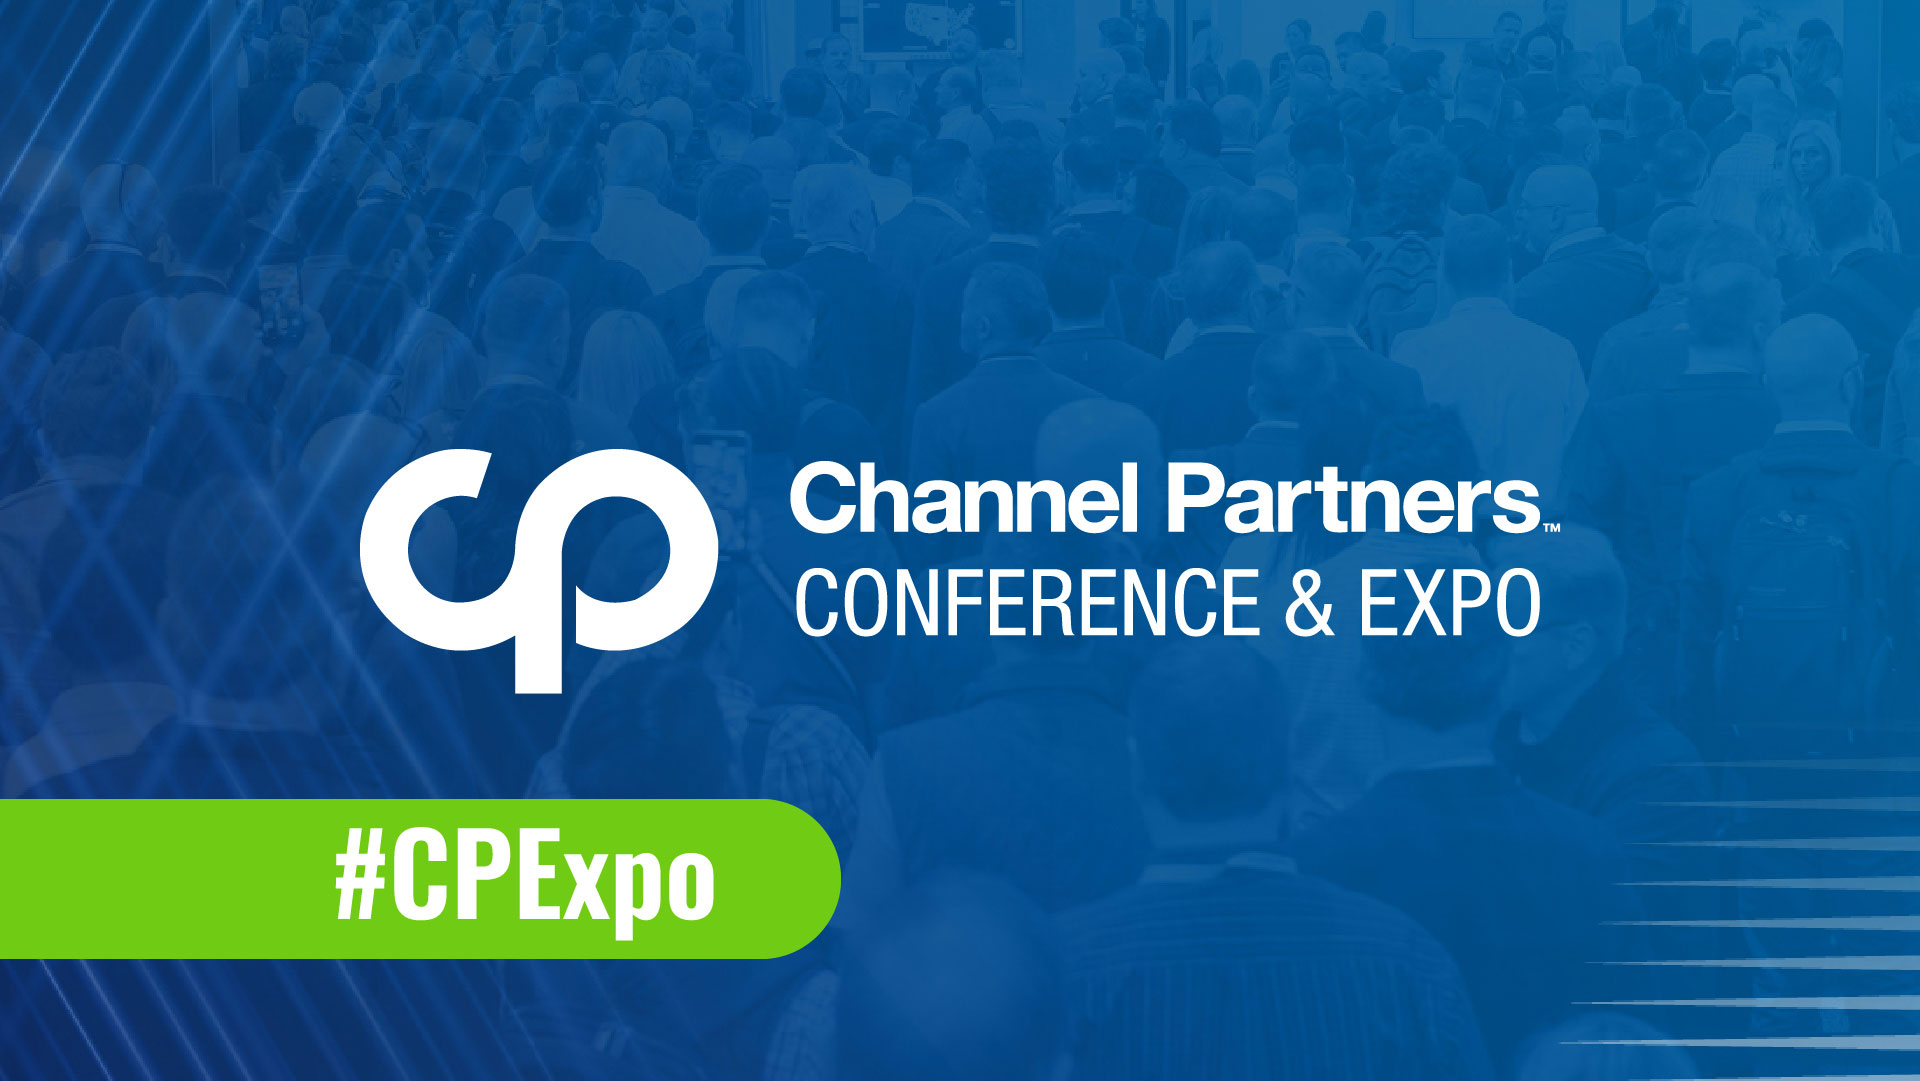 Channel Partners Conference & Expo World's Largest Channel Event